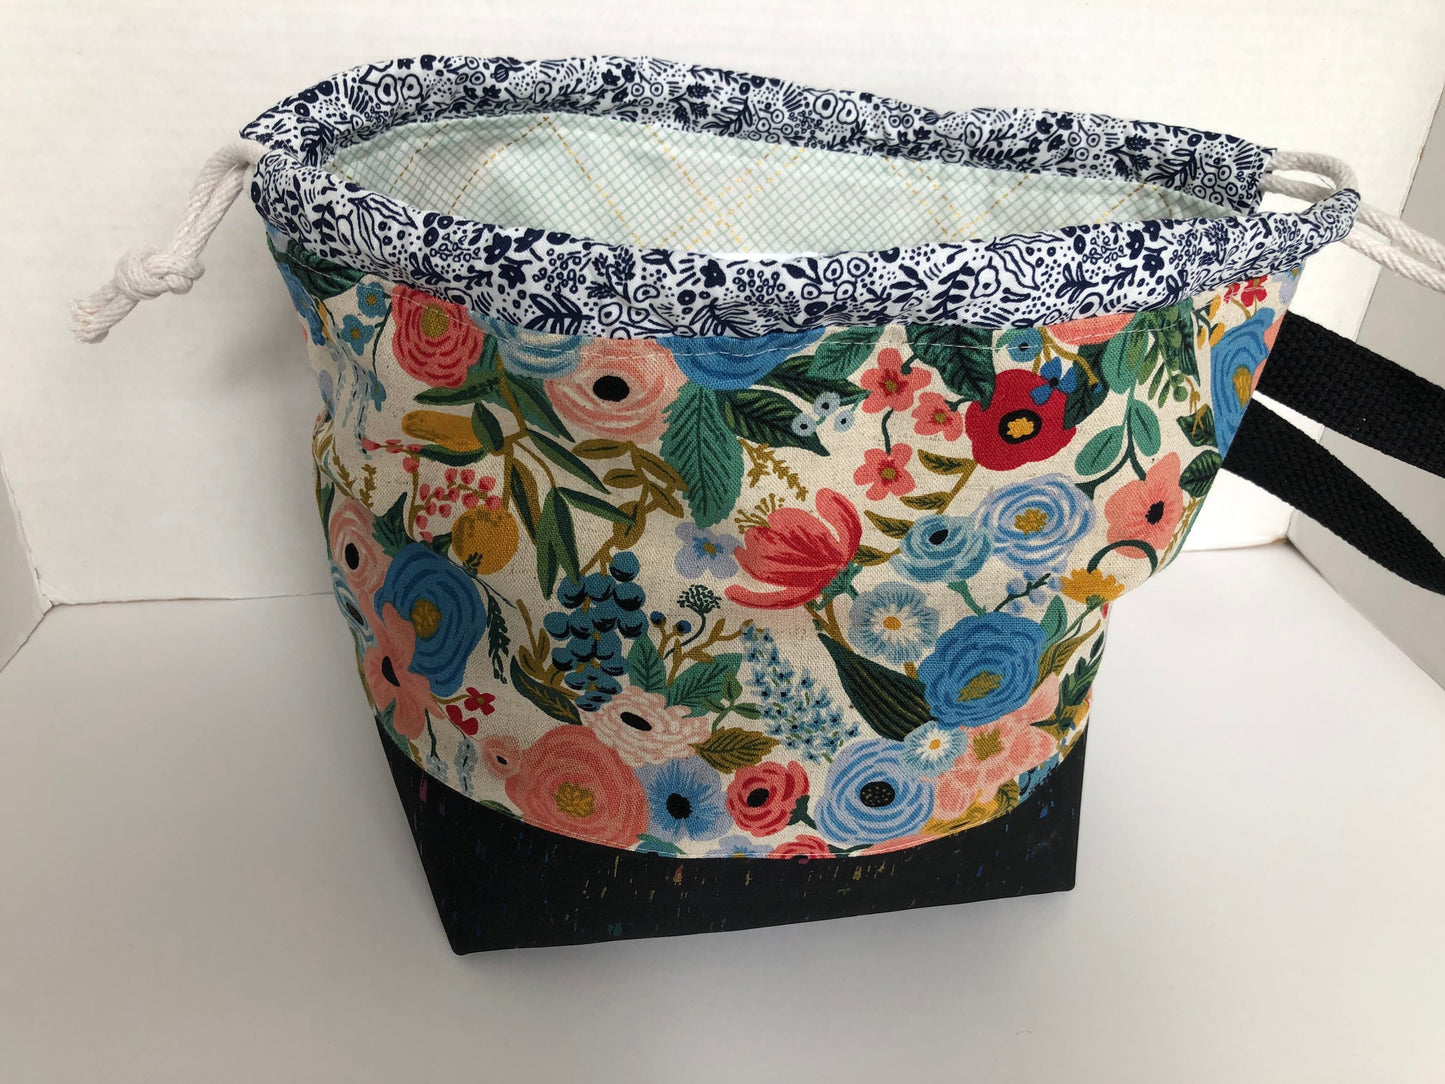 Small Project Bag, Canvas and Cork Knitting Bag